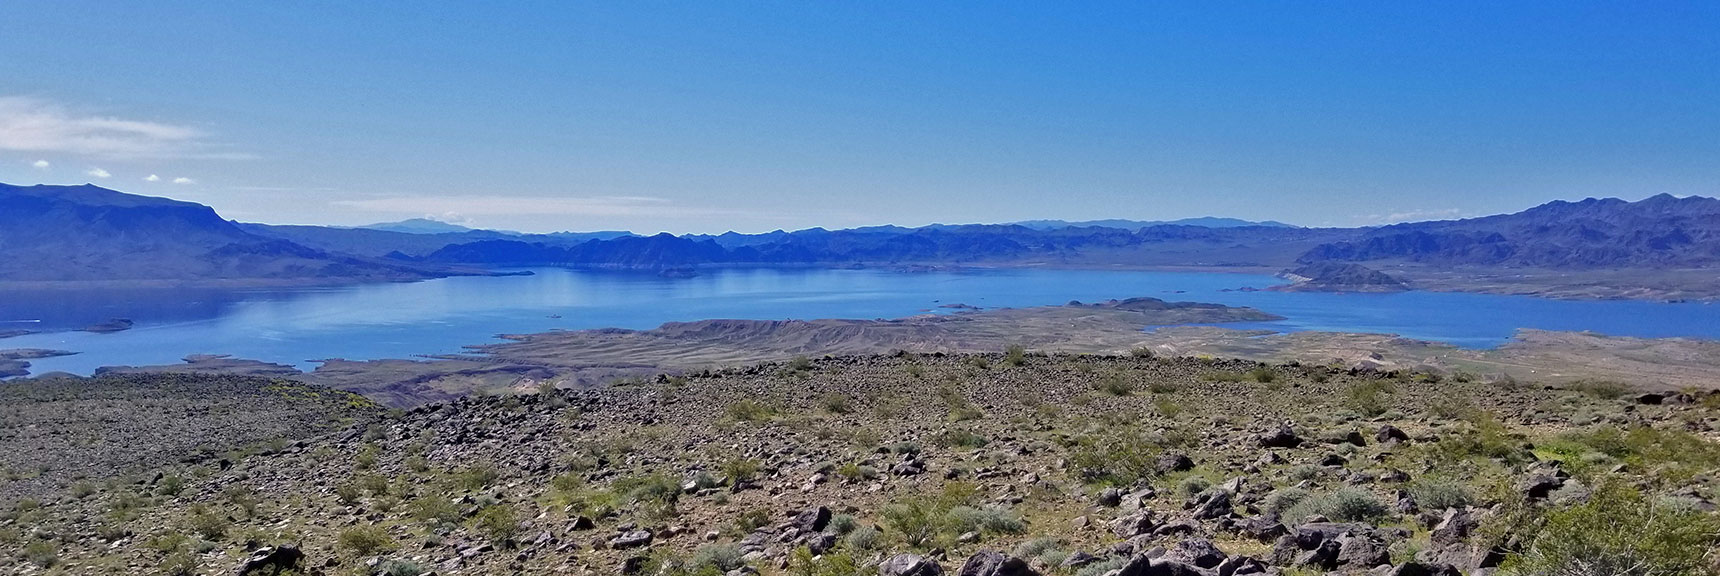 View of Lake Mead from Summit of Black Mesa in Lake Mead National Recreation Area, Nevada